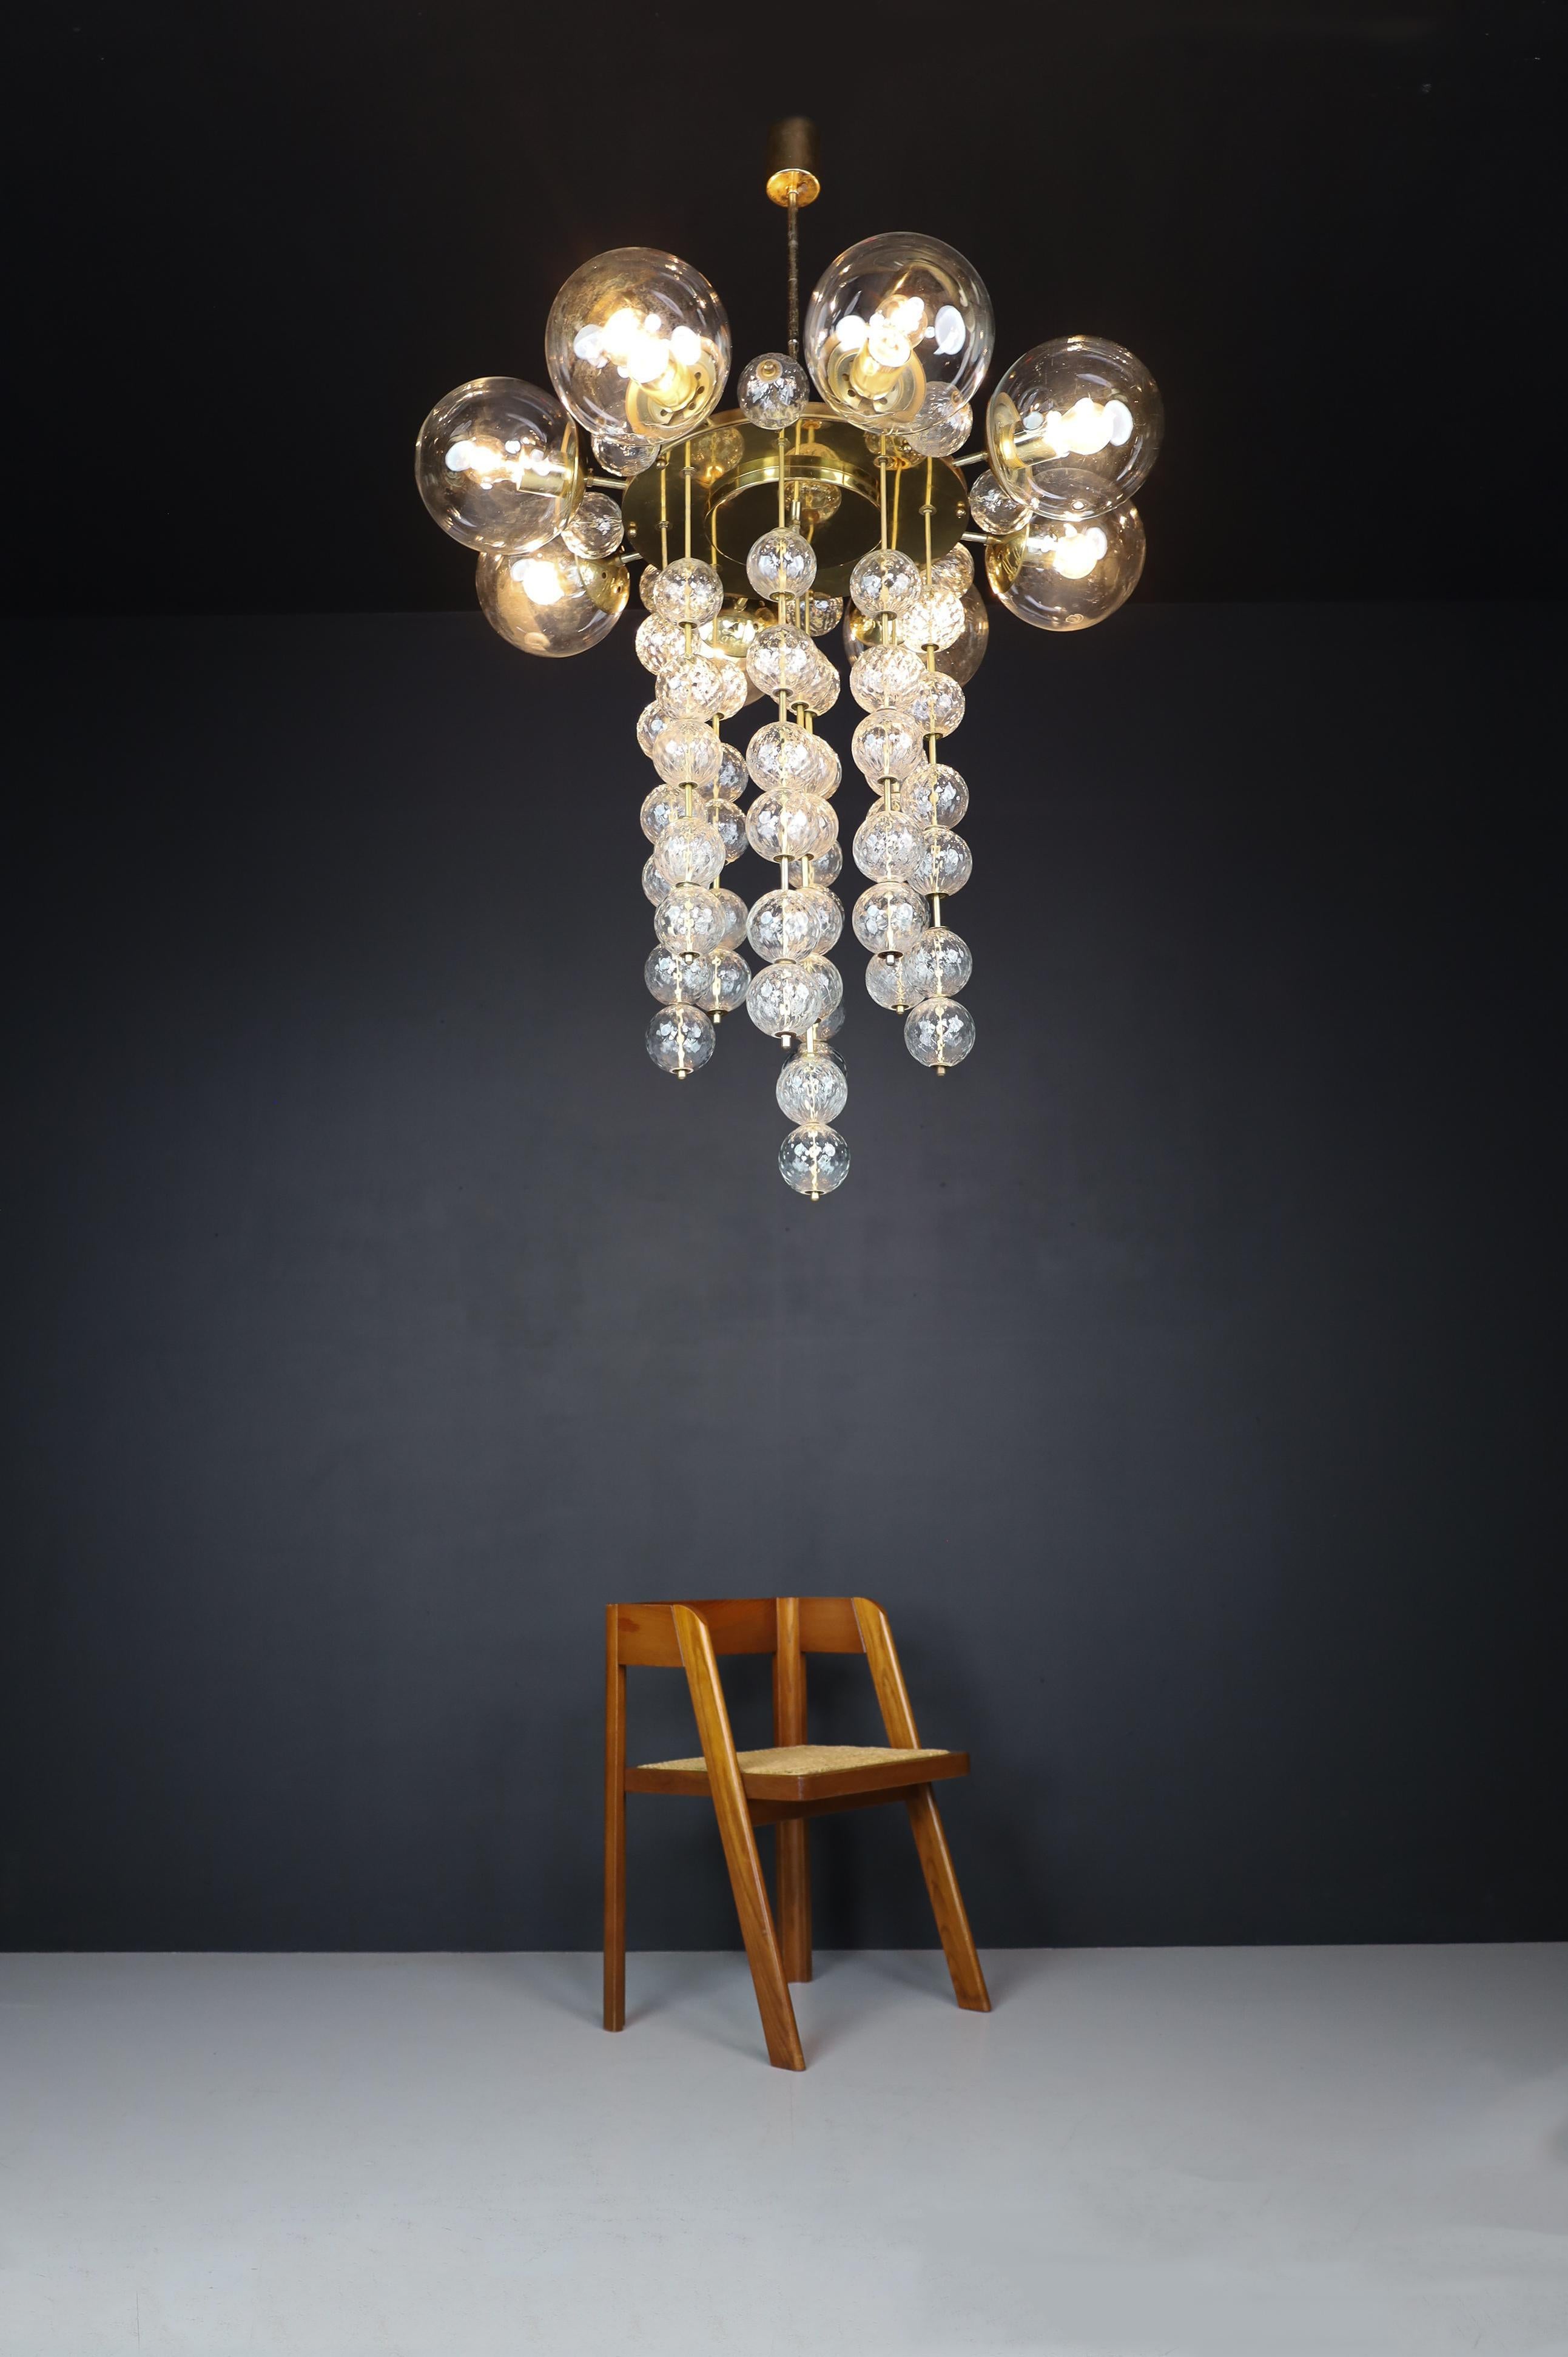 Grand Chandelier with brass fixture and hand-blowed glass globes, Czechia 1950s

This large chandelier with a brass fixture and hand-blown clear glass globes was designed and produced in Czechia during the 1960s. It features eight large clear glass